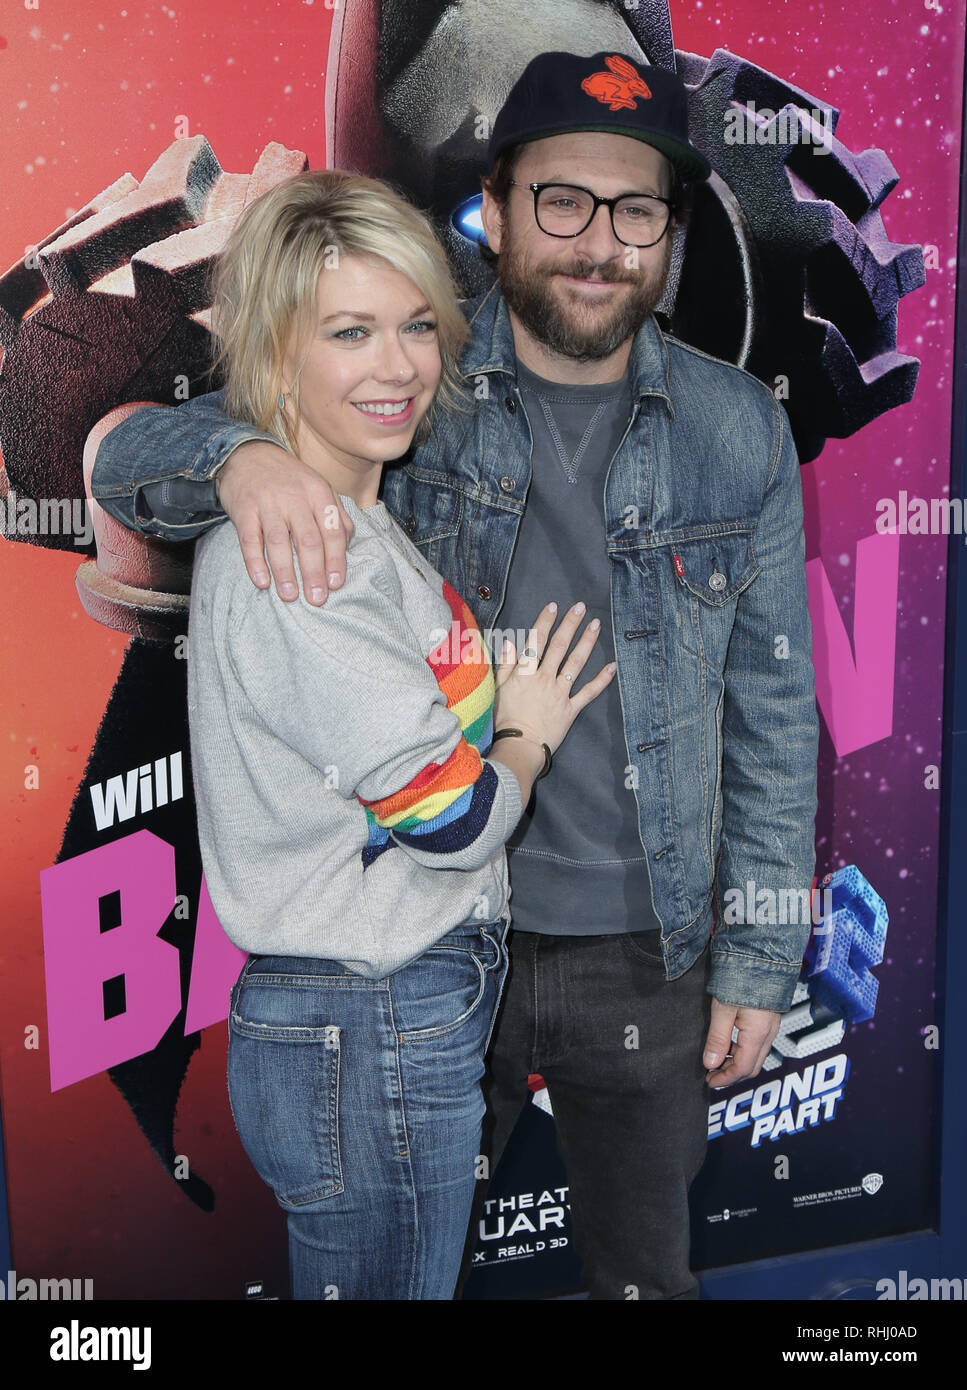 Photo: Charlie Day and Mary Elizabeth Ellis attend the Lego Movie 2  premiere in Los Angeles - LAP2019020244 